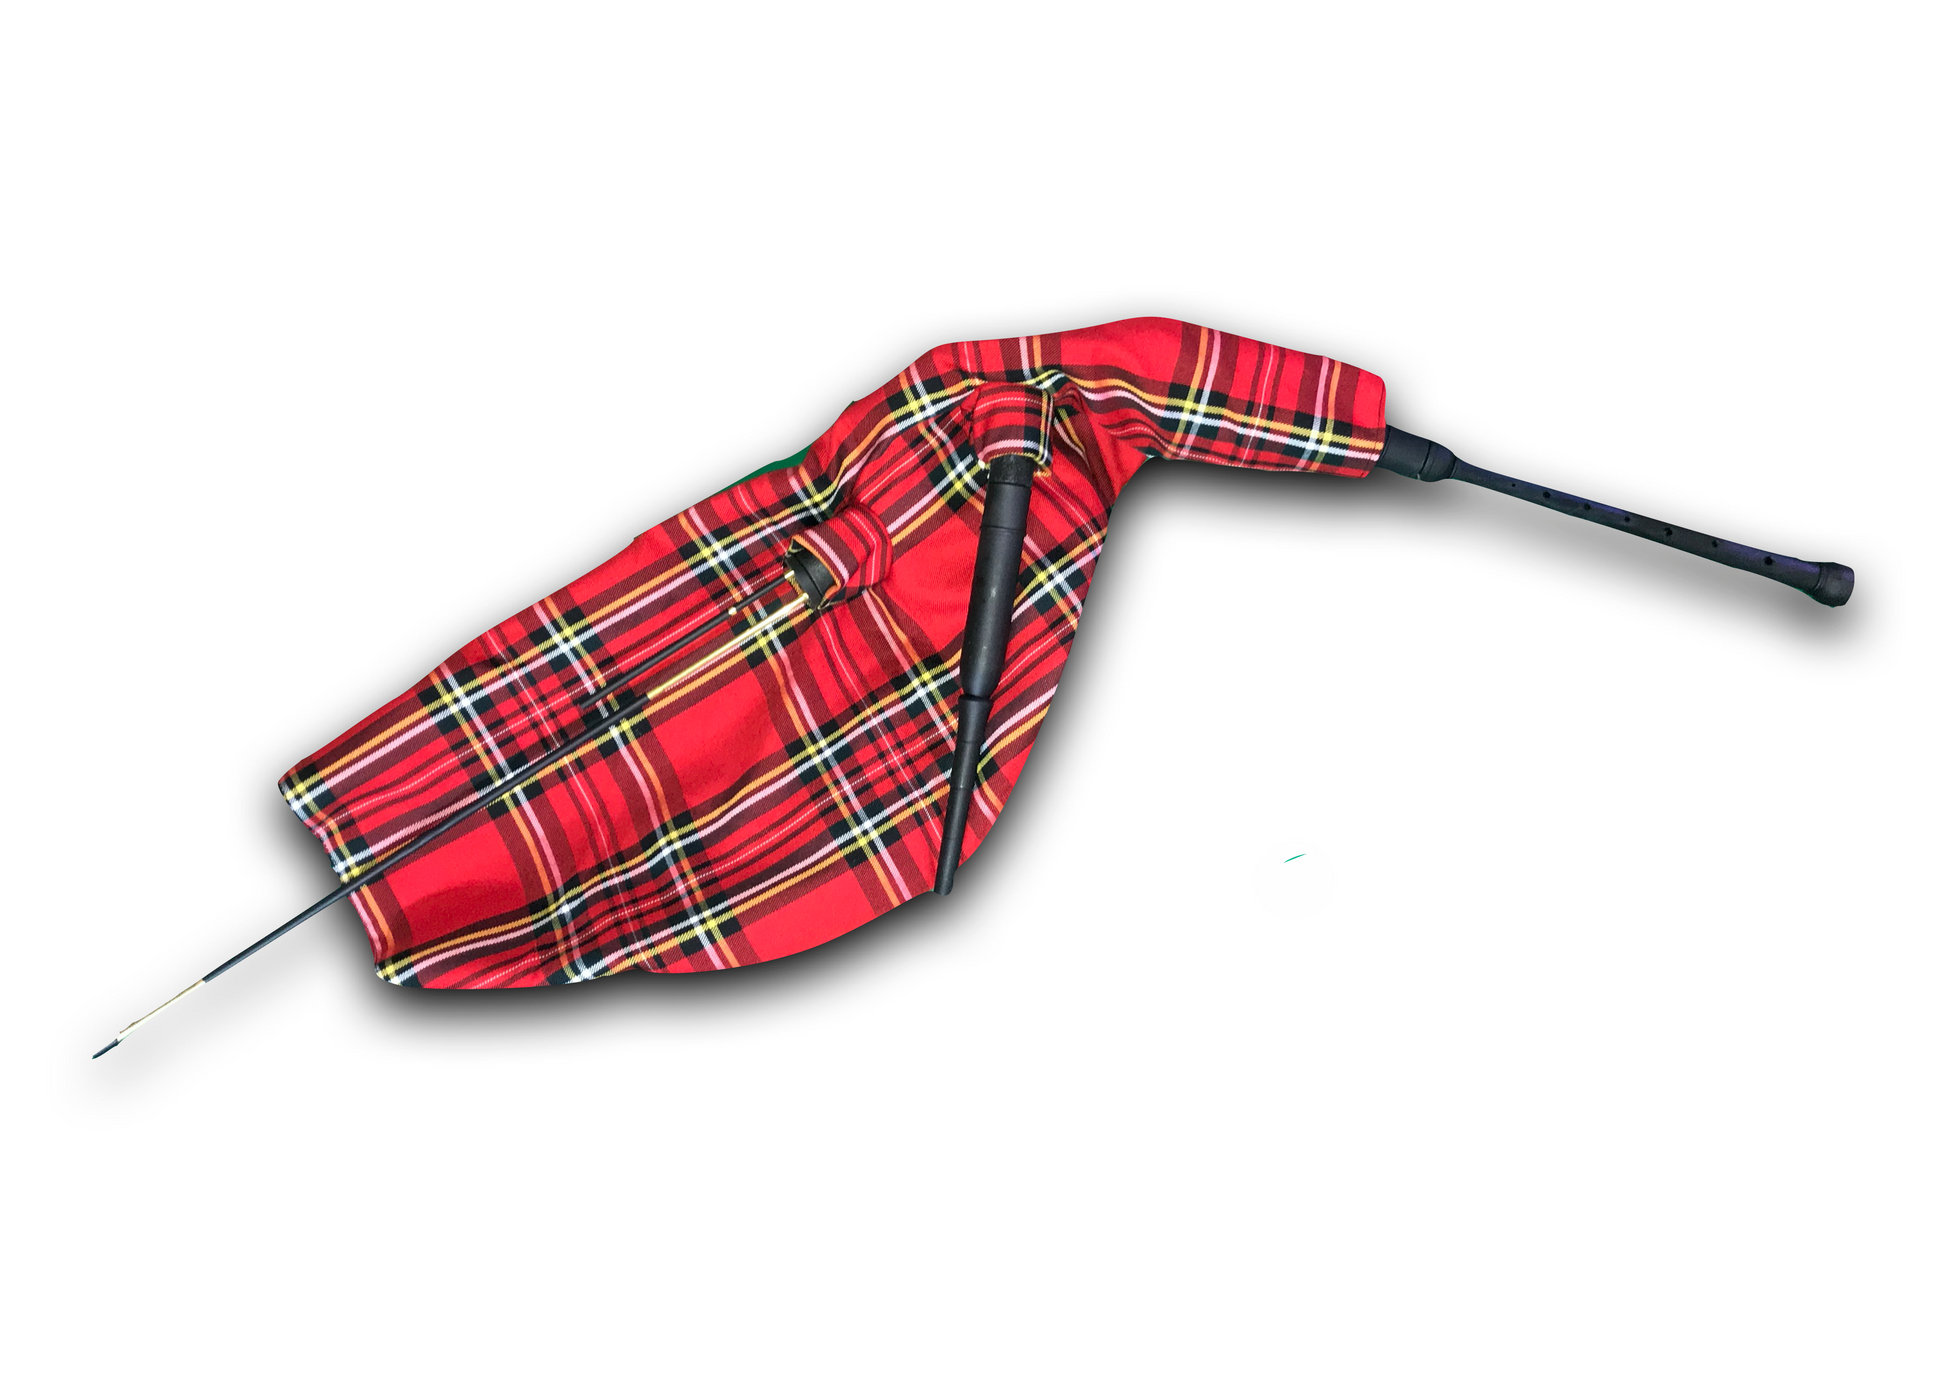 A Complete set of scottish Practice Pipes with a red tartan cover, brass drones and synethtic chanter and blowpipe, ideal for beginners and indoor bagpipe practice - Bagpipes Galore